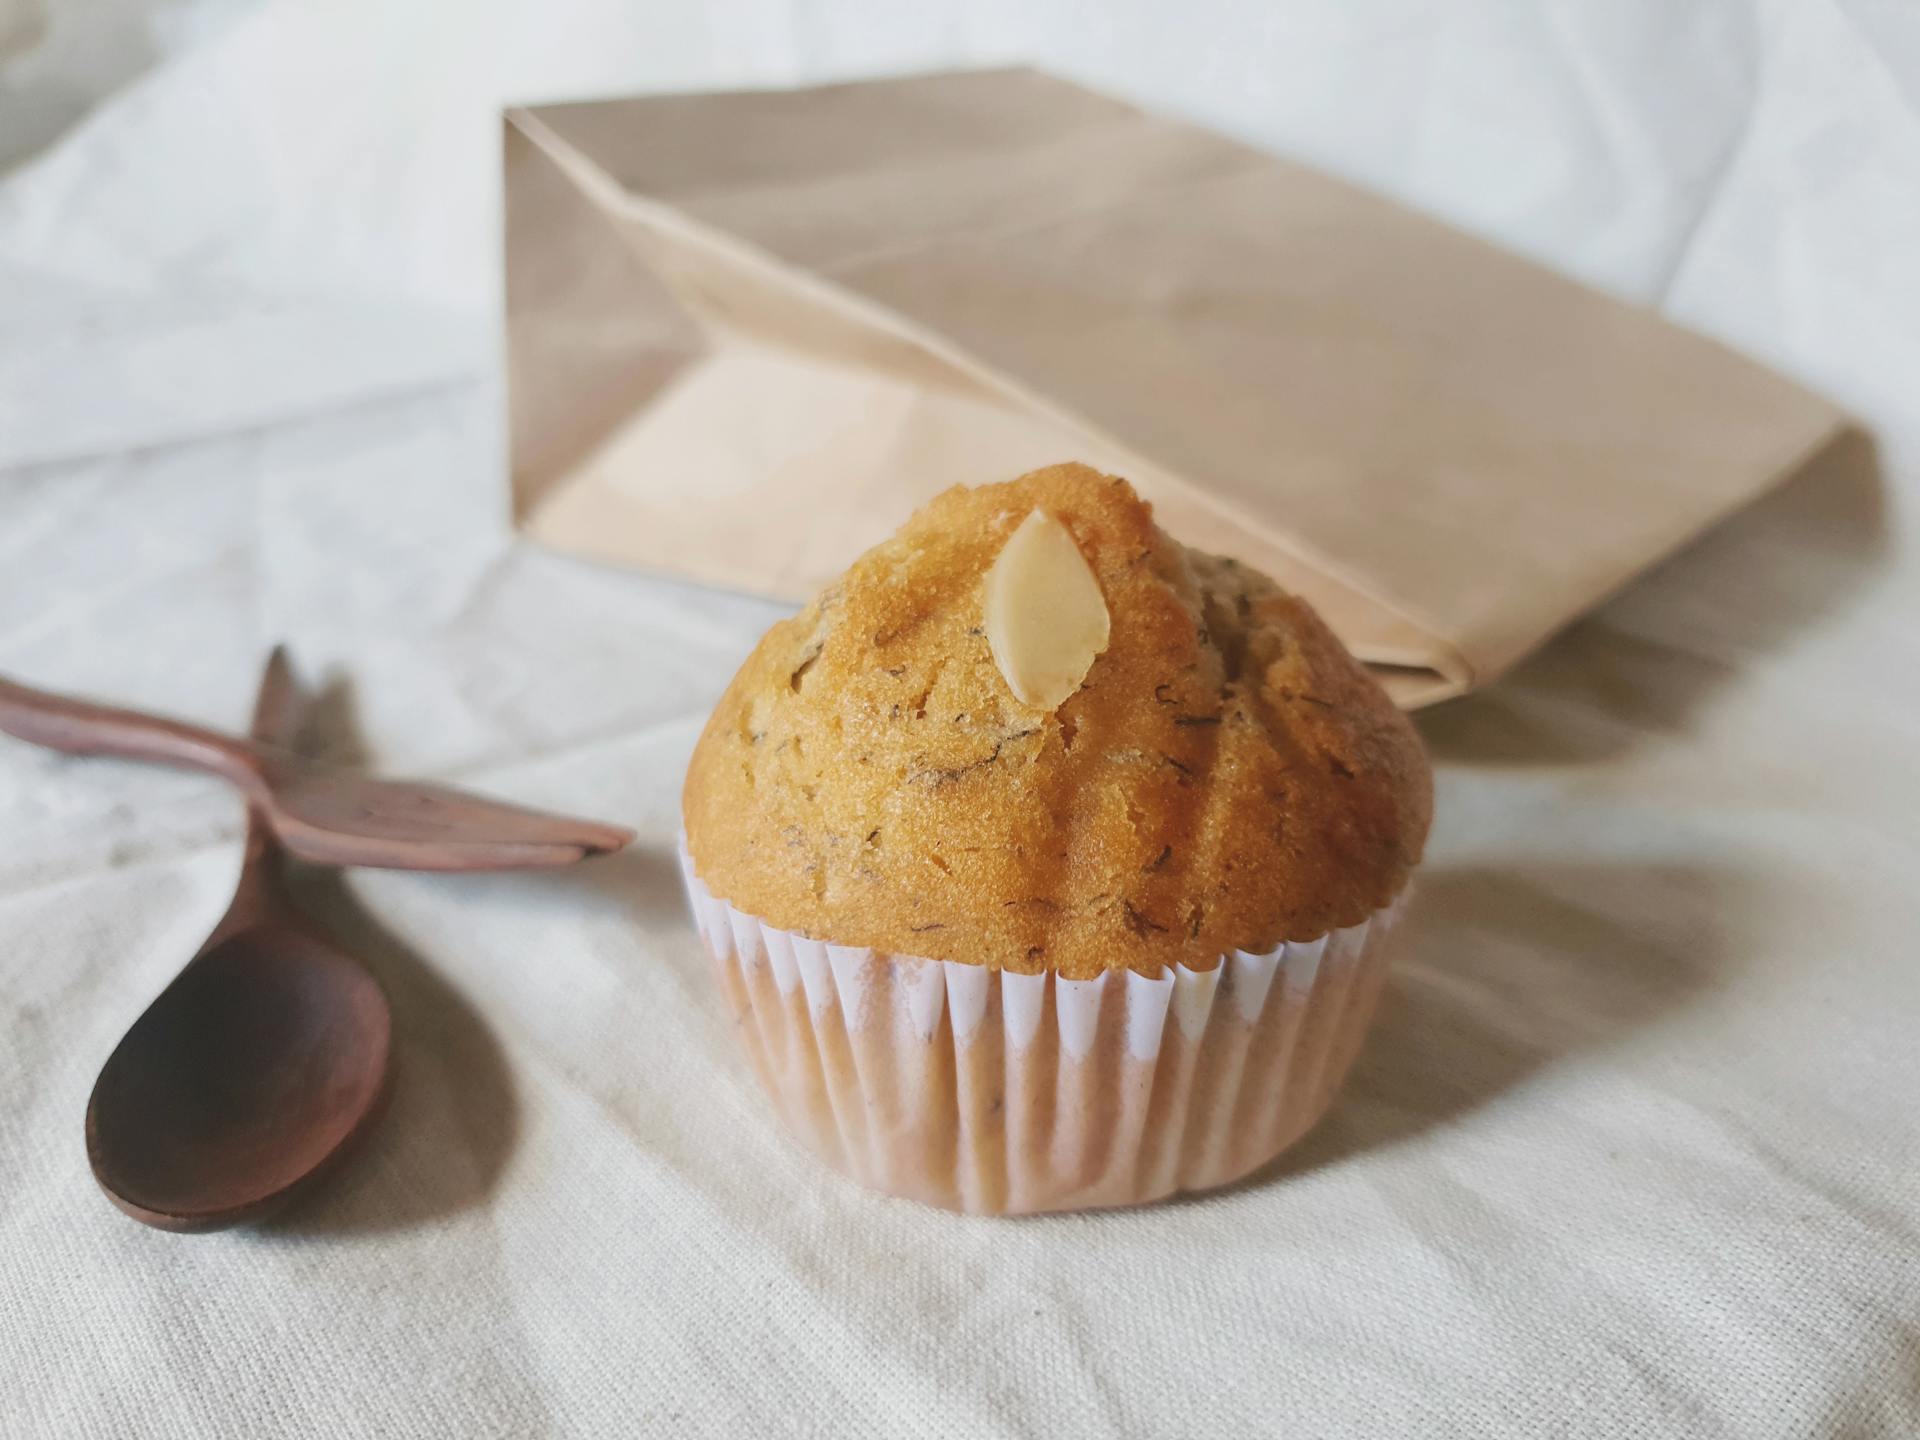 A muffin and a brown paper bag | Source: Pexels